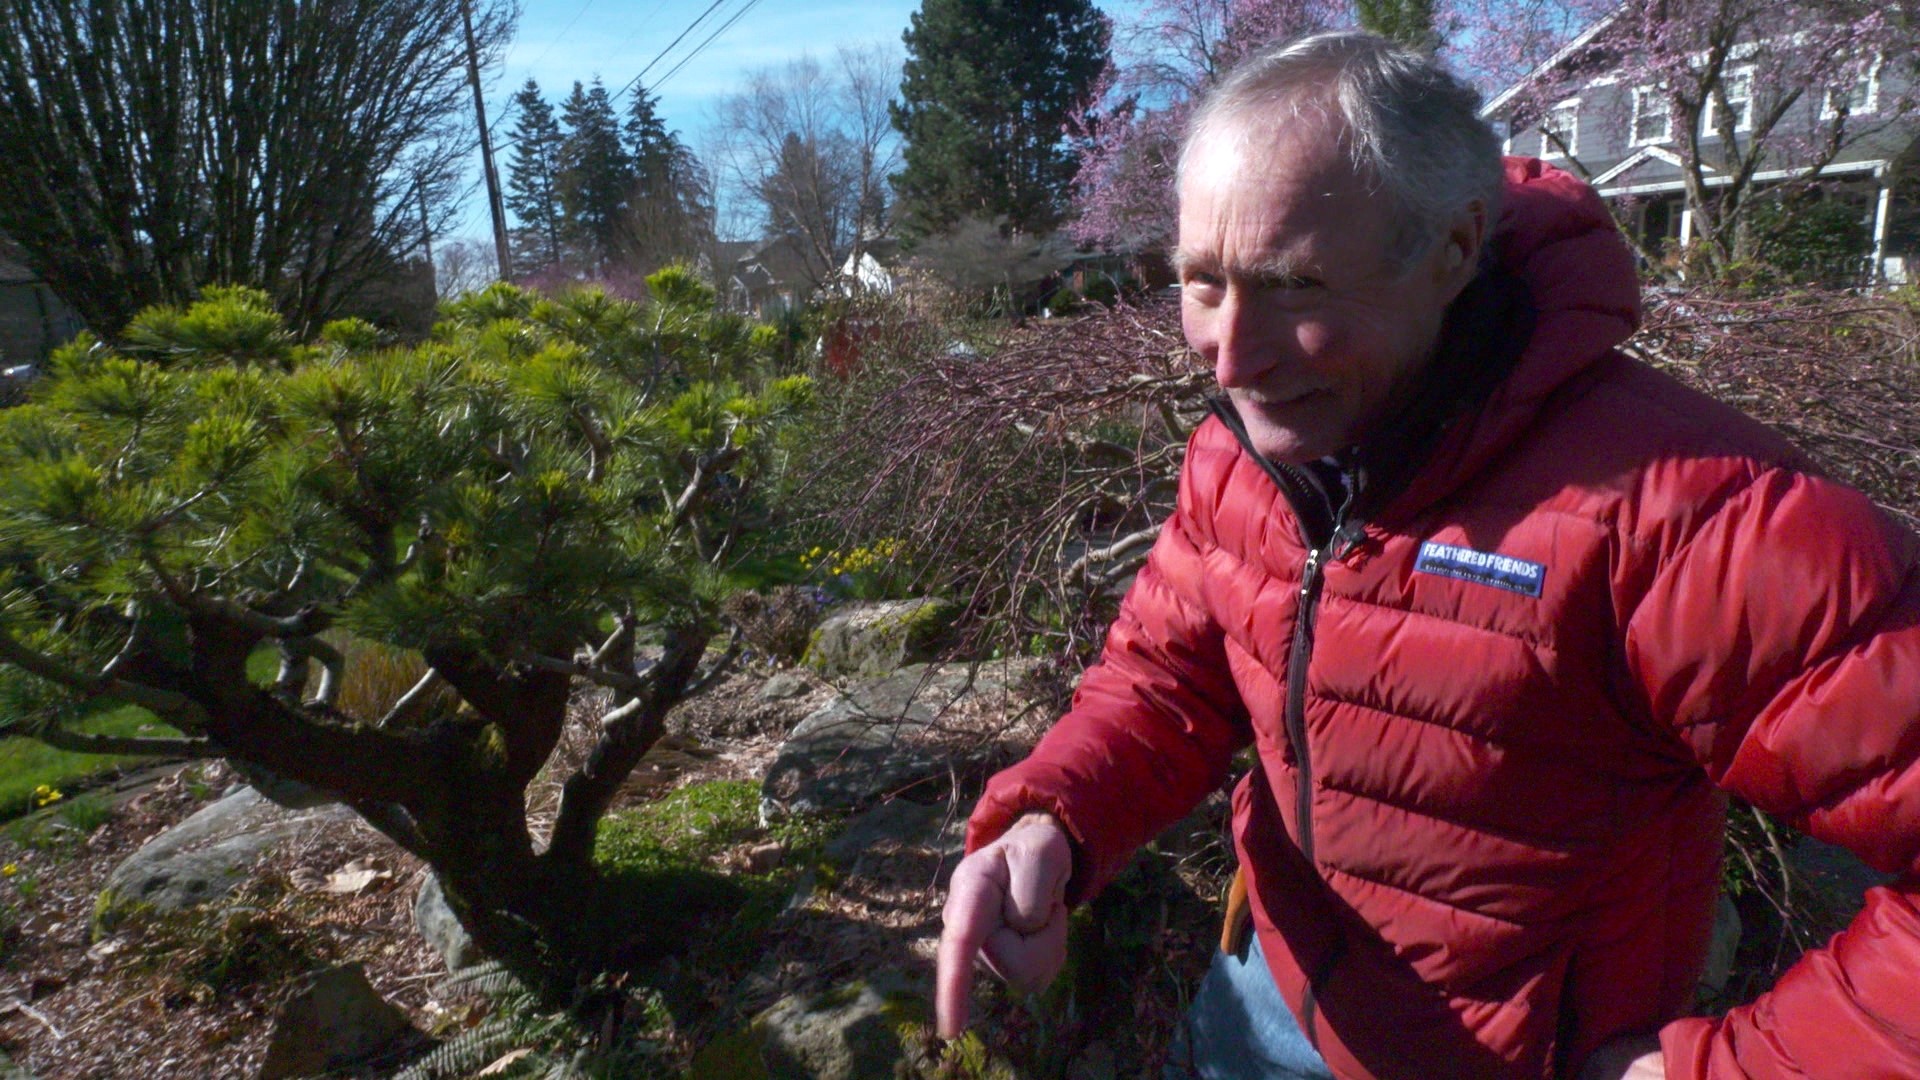 The Seattle gardening expert attempted to save a rare variety of rhododendron that had been planted in the wrong spot, not once, but twice. #k5evening